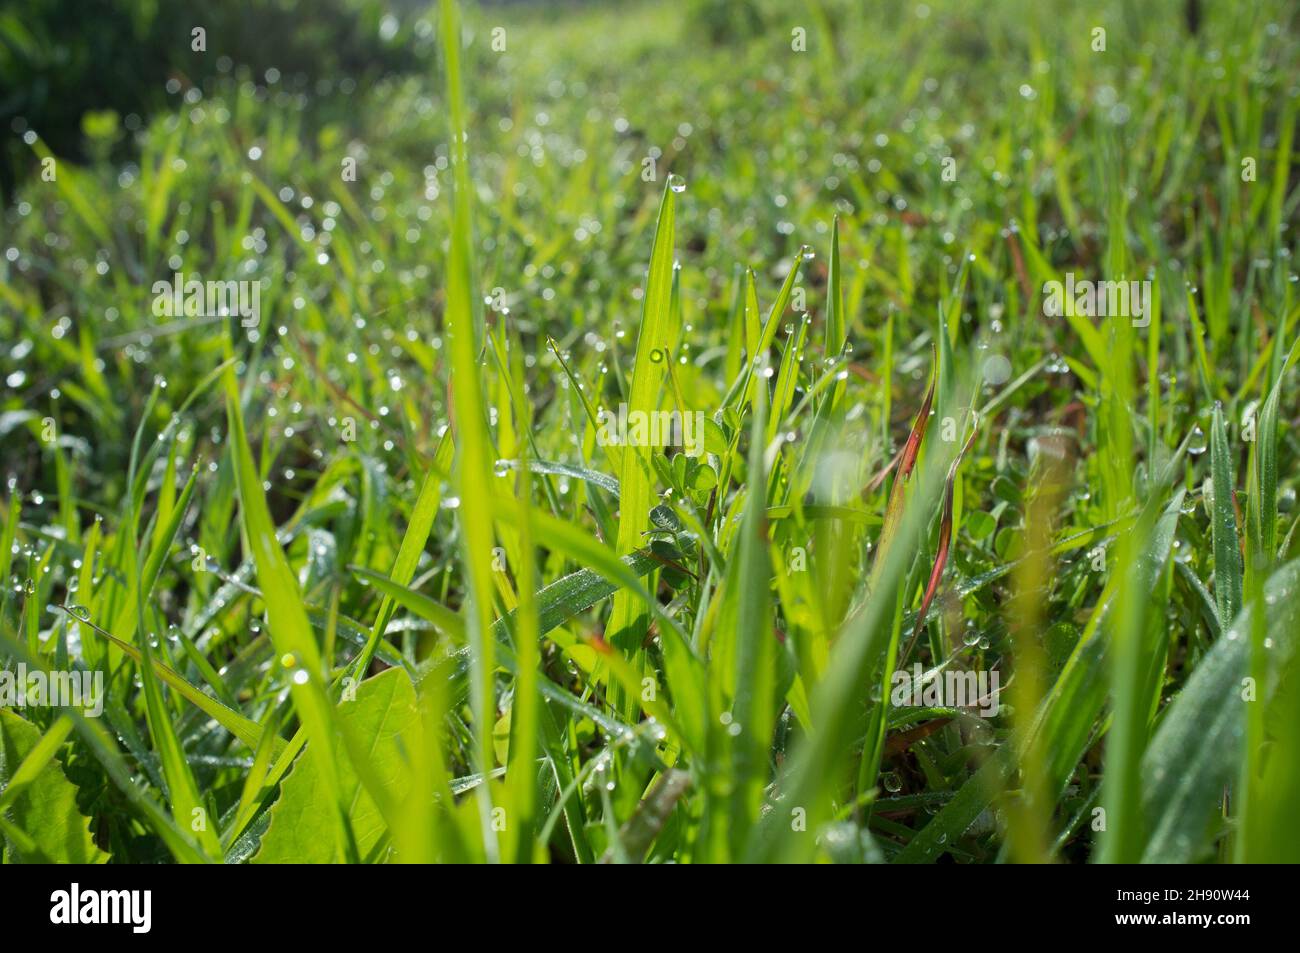 Beautiful ground green grass on a winter sunset. Blade full of drops of dew. Stock Photo